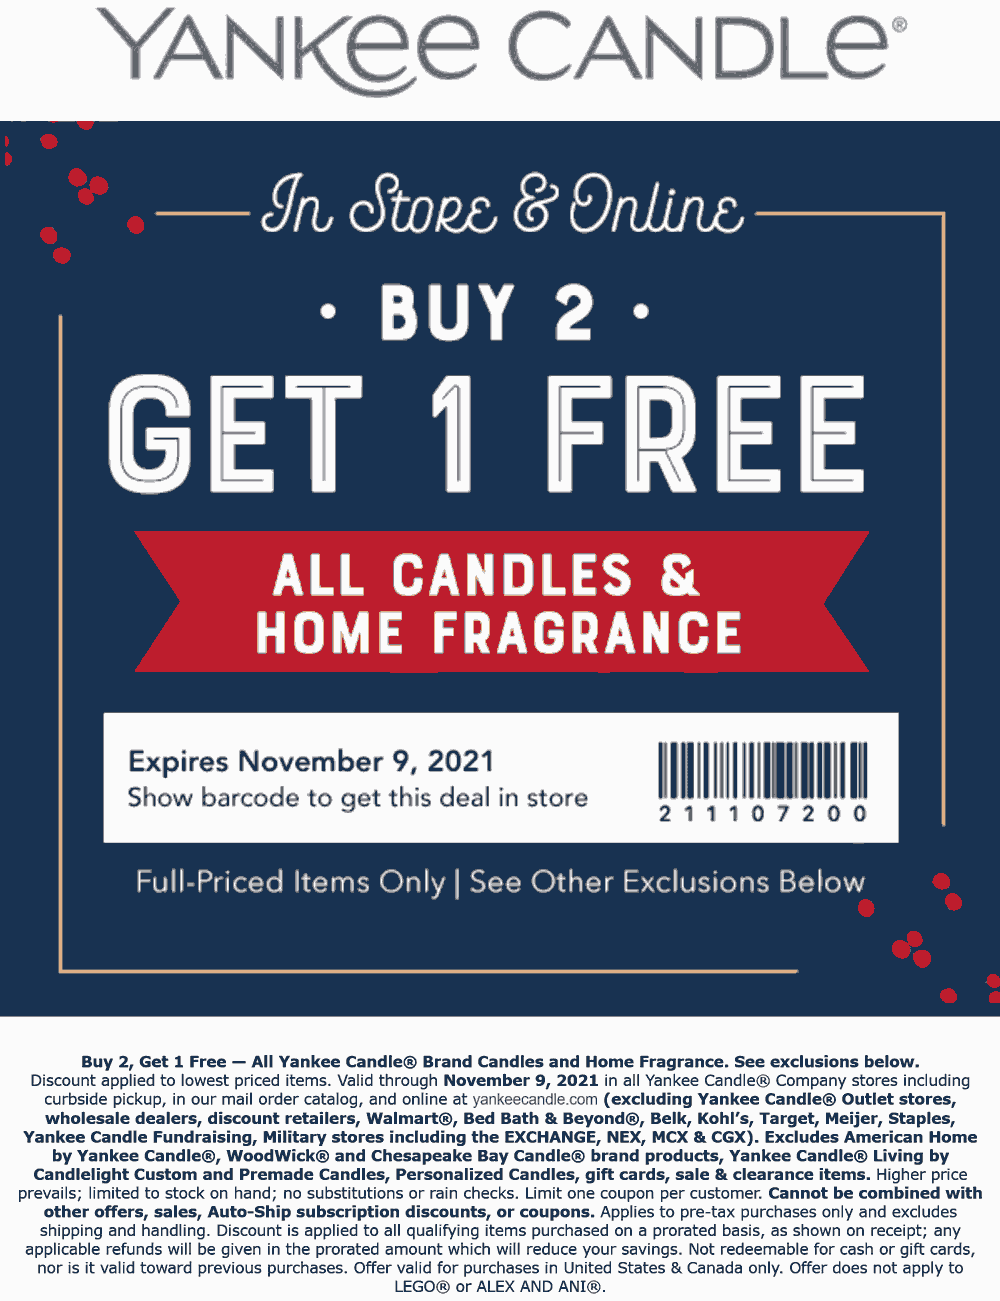 Yankee Candle stores Coupon  3rd fragrance or candle free at Yankee Candle, ditto online #yankeecandle 